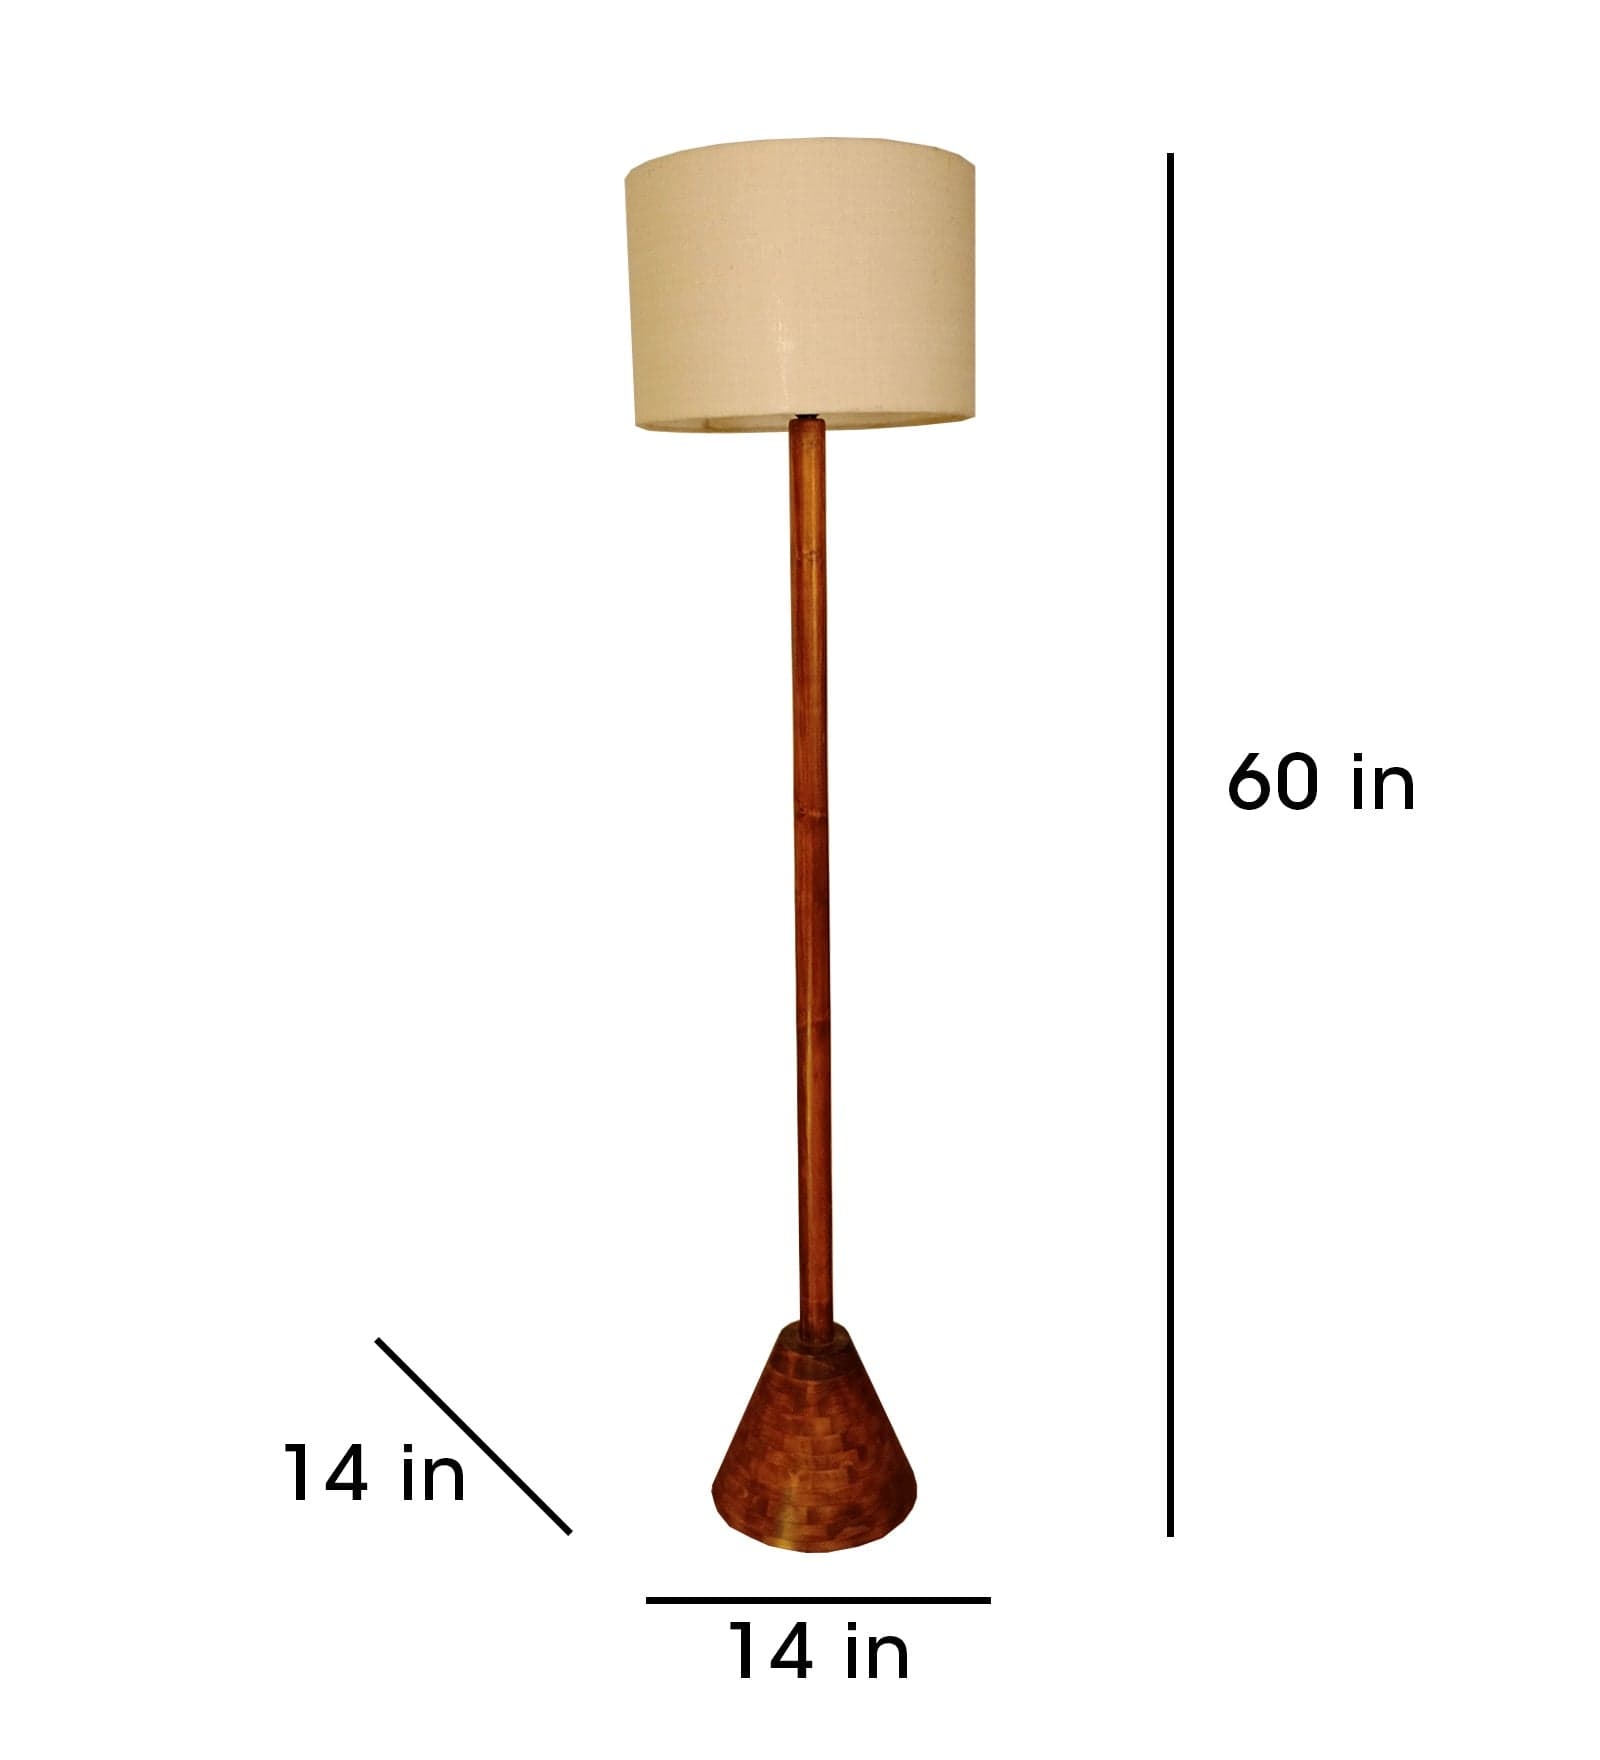 Brice Wooden Floor Lamp with Brown Base and Jute Fabric Lampshade (BULB NOT INCLUDED)